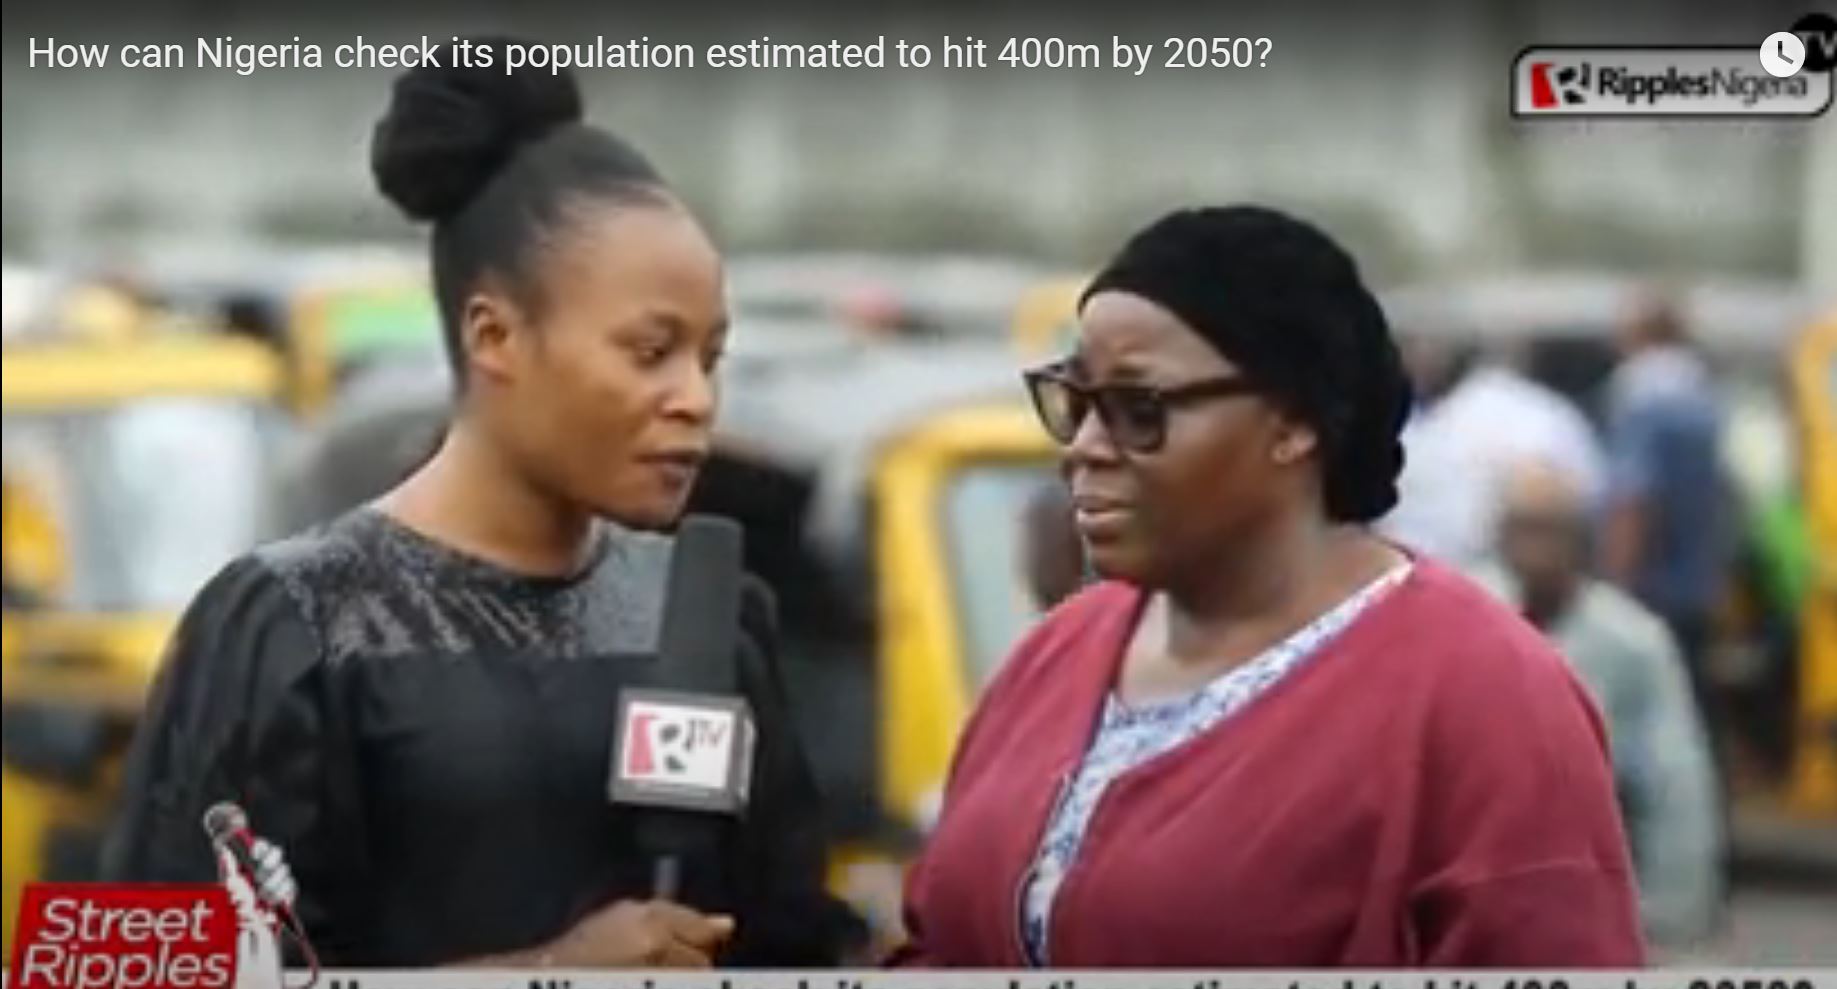 [STREET RIPPLES] How can Nigeria check its population estimated to hit 400m by 2050?